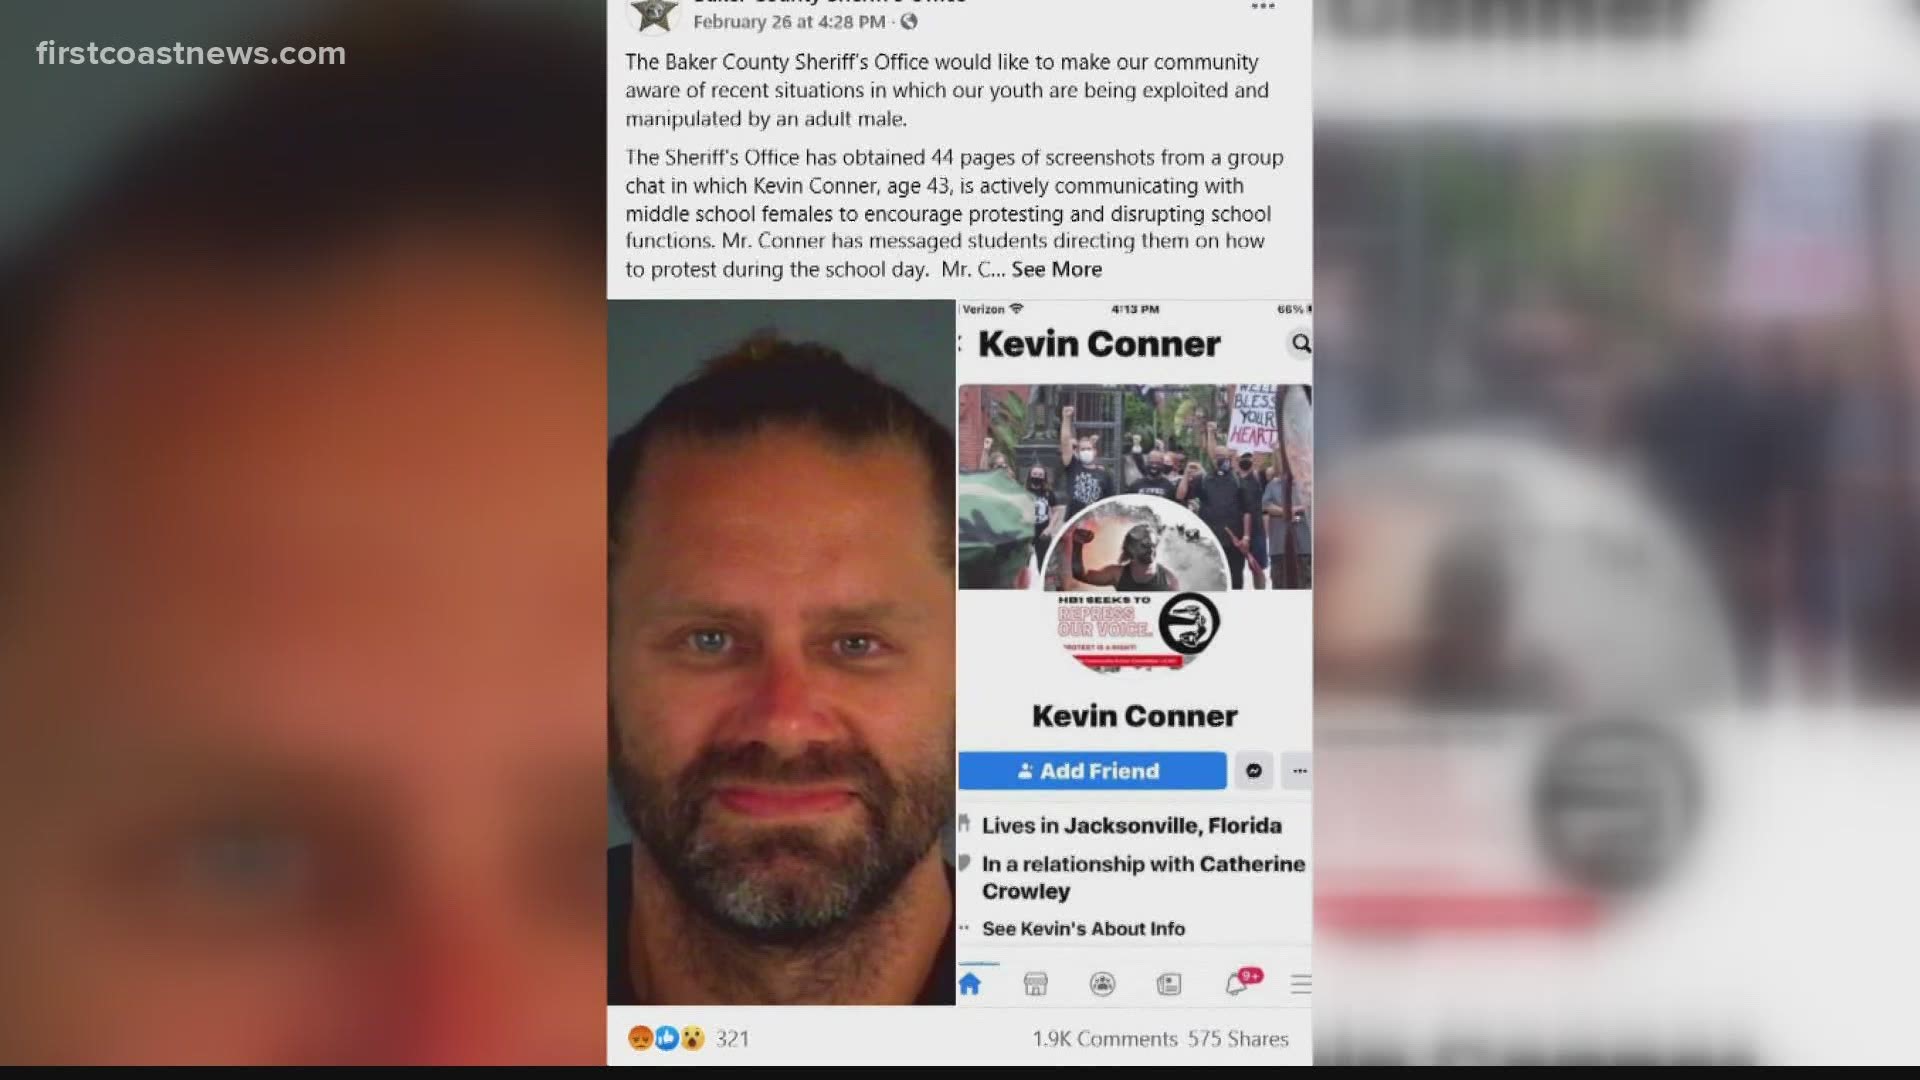 Community activist in Clay County threatens to sue Baker County Sheriff's Office over Facebook post